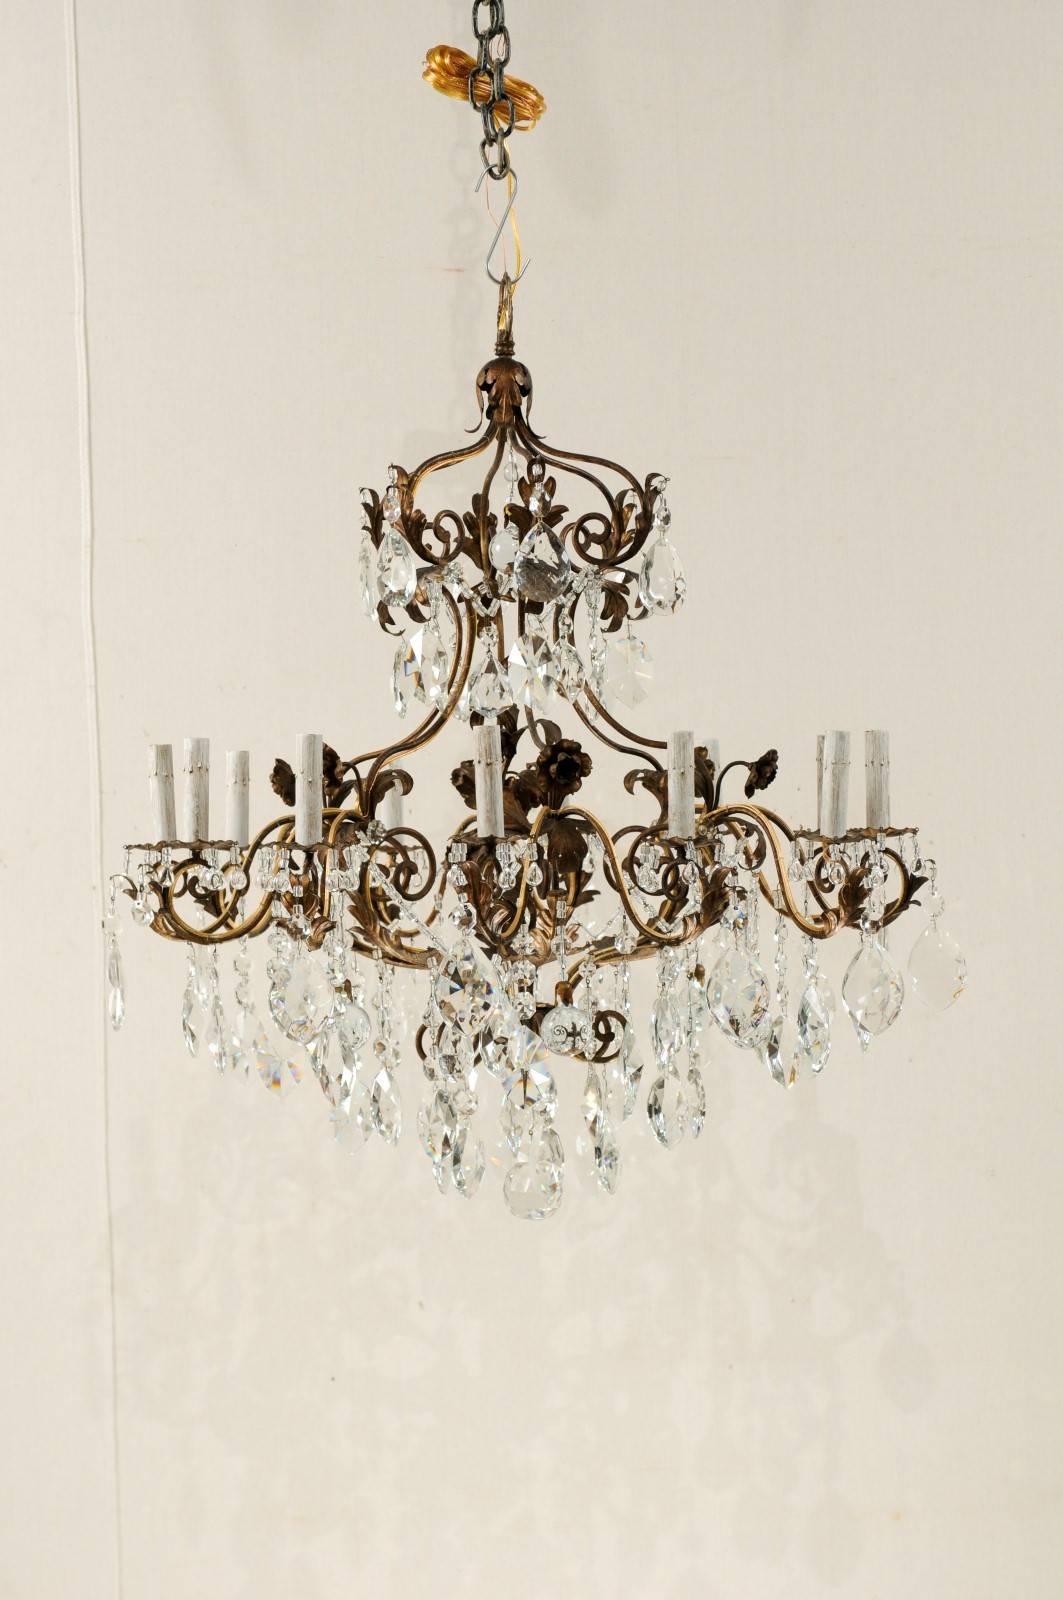 An Italian twelve-light crystal and iron chandelier from the mid-20th century. This elegant Mid-Century Italian twelve-light chandelier features and abundance of various faceted crystals with strung Italian glass beads stemming from the ornately